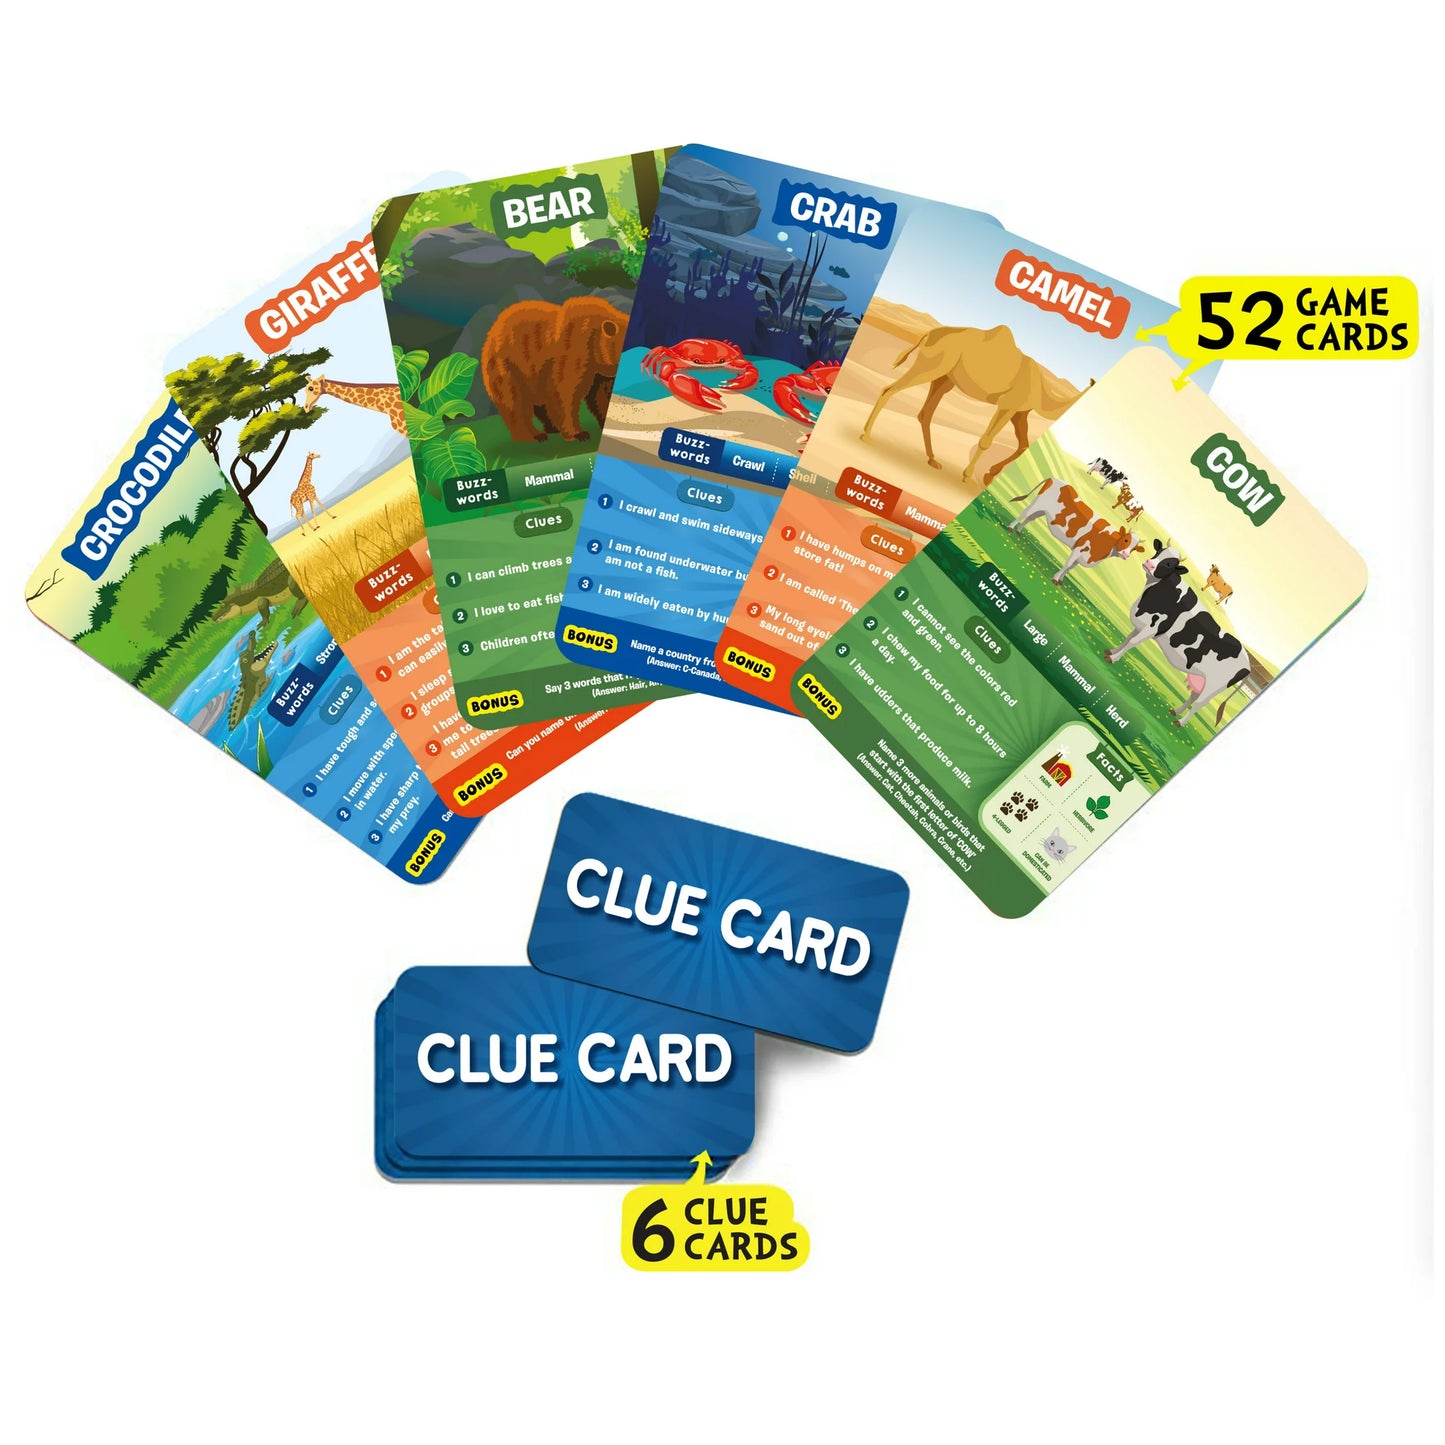 Skillmatics Guess in 10 Animal Planet | Card Game of Smart Questions | Super Fun for Travel & Family Game Night | Gifts for Ages 6 and Up